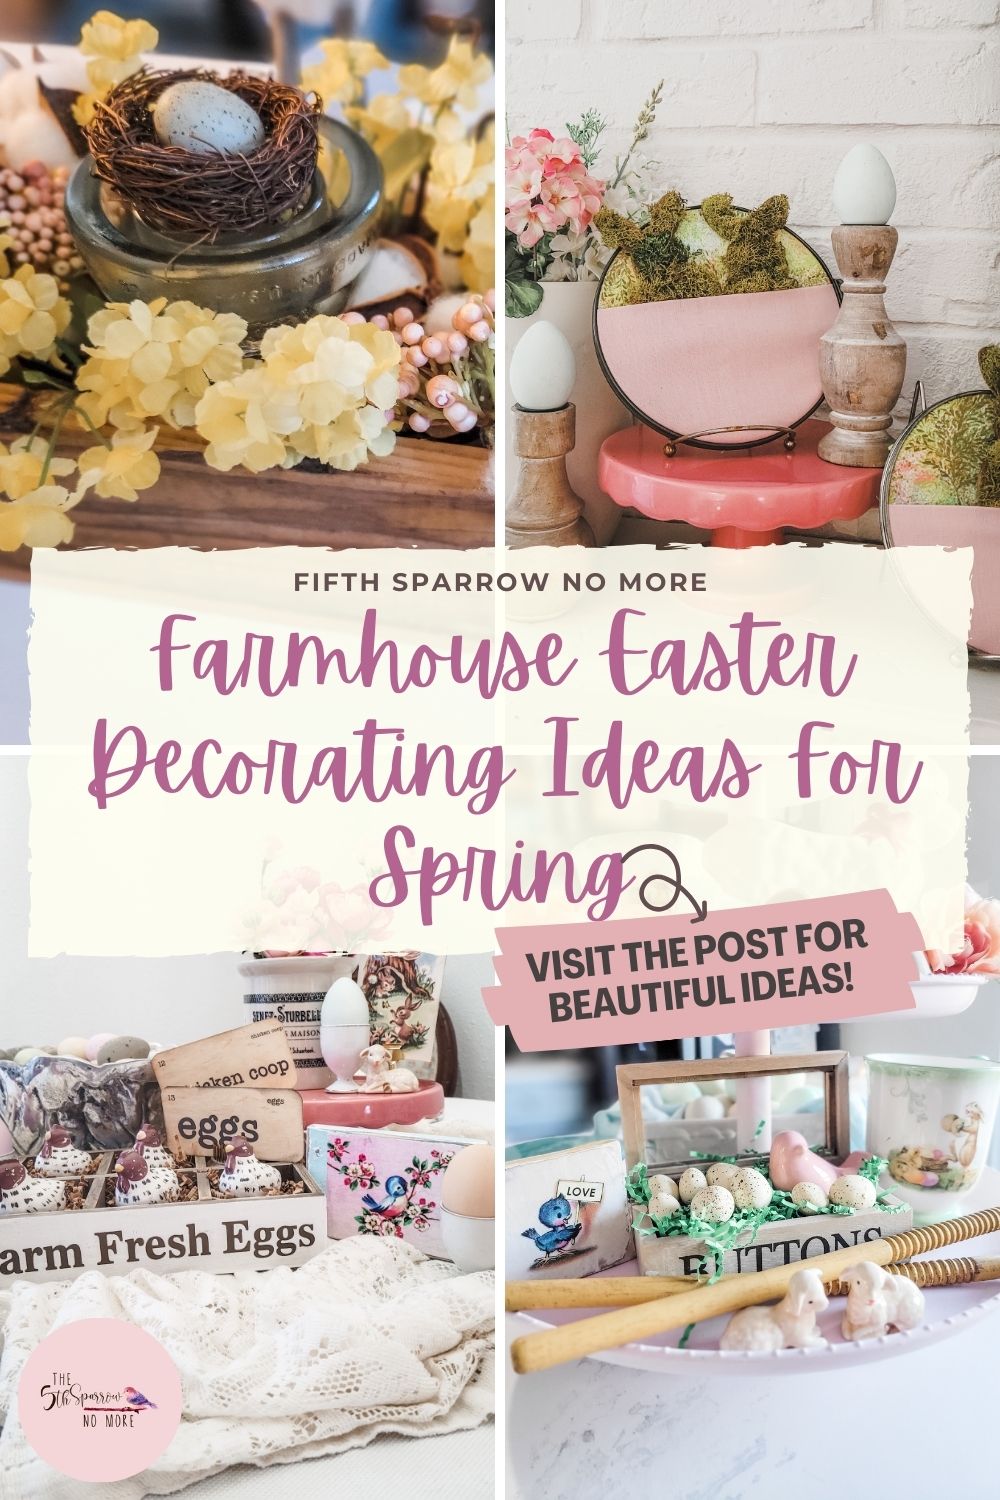 For this blog post I'm sharing some of the best farmhouse Easter decorating ideas for this Spring for mantels, tiered trays, tables and more.